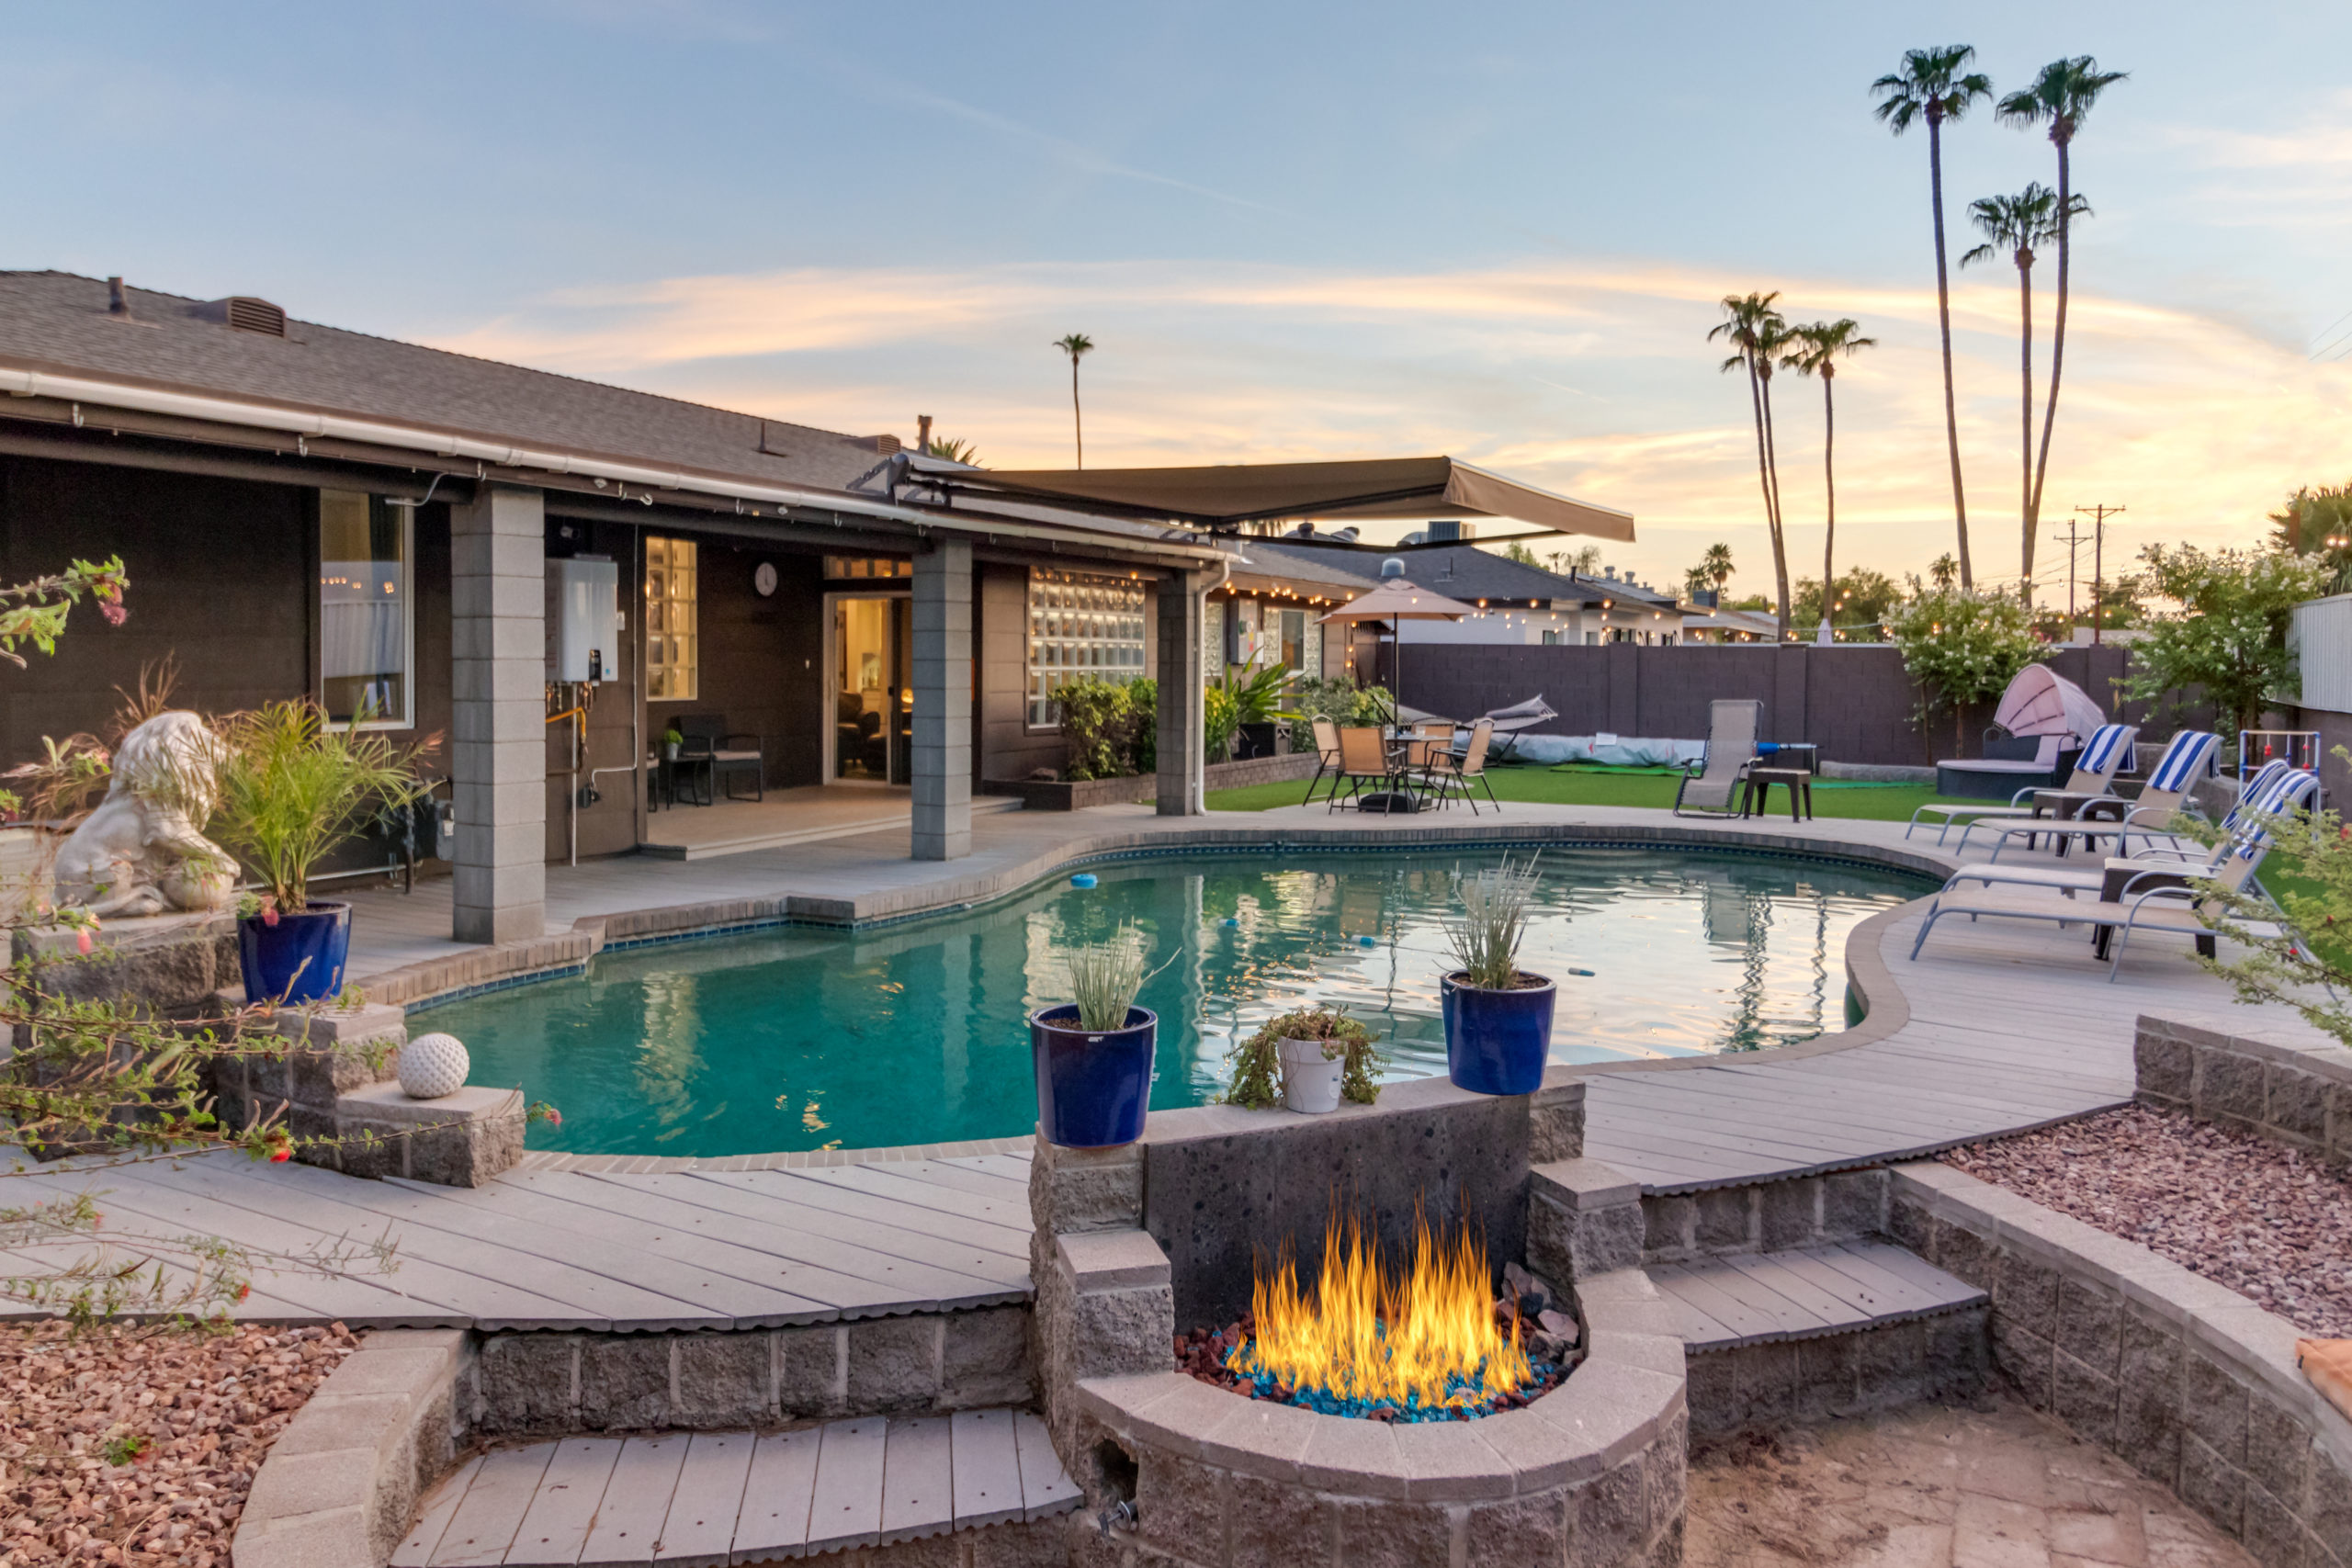 Our gorgeous Rentals in Scottsdale